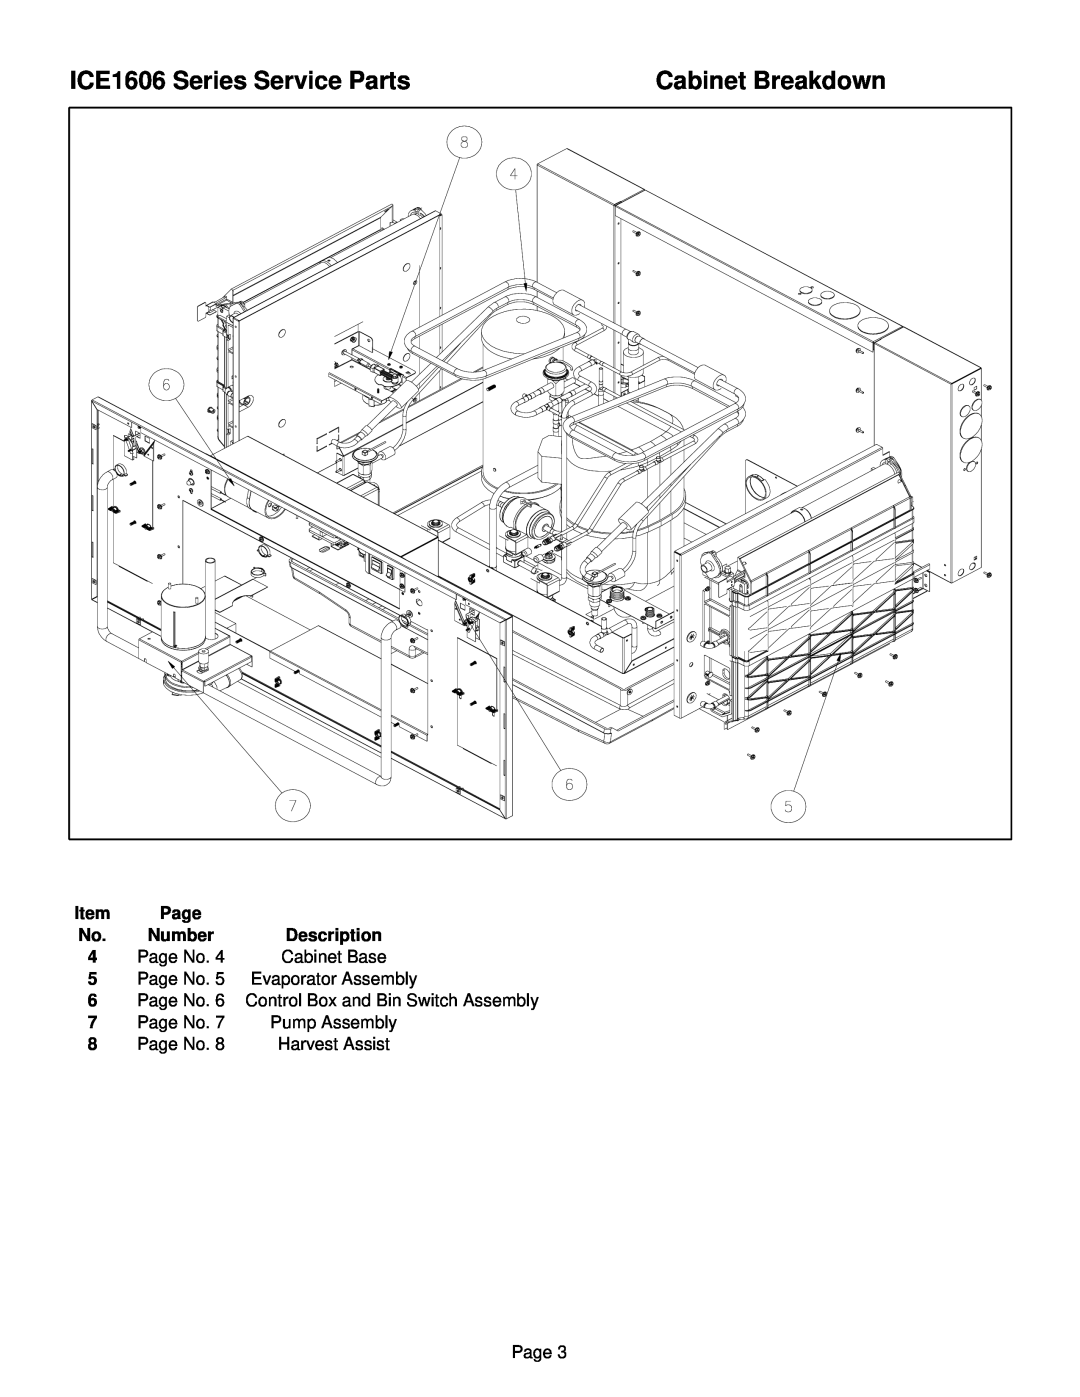 Ice-O-Matic manual Cabinet Breakdown, ICE1606 Series Service Parts 